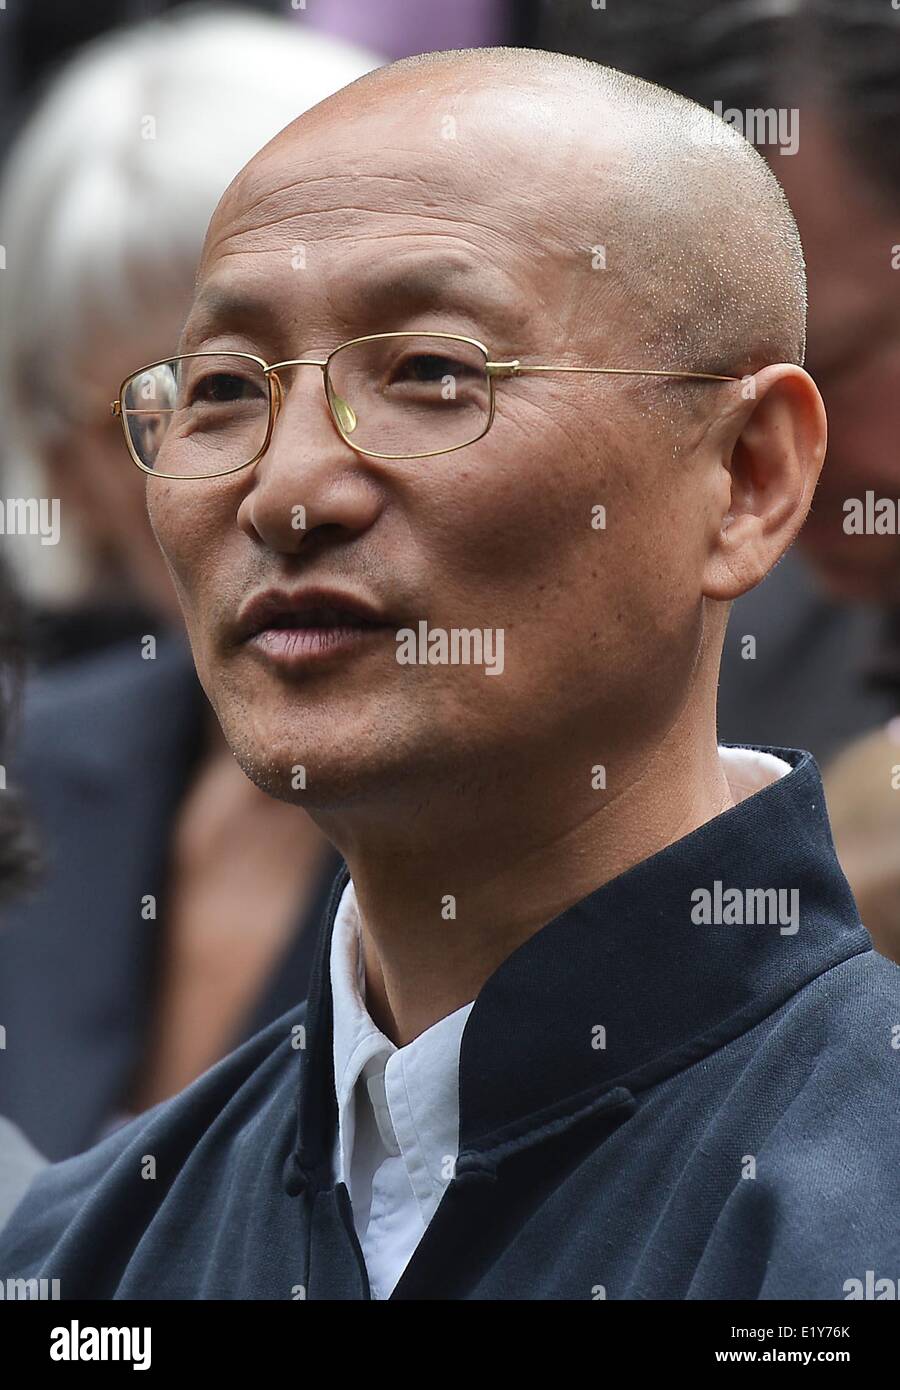 Wuppertal, Germany. 11th June, 2014. Artist Zeng Chenggang takes part in the unveiling of the monument of the philosopher and social theorist Friedrich Engels (1820-1895) donated by the People's Republic of China in Wuppertal, Germany, 11 June 2014. The nearly four-meter bronze sculpture commemorates the co-founder of Marxism, who was born in Wuppertal. Credit:  dpa picture alliance/Alamy Live News Stock Photo